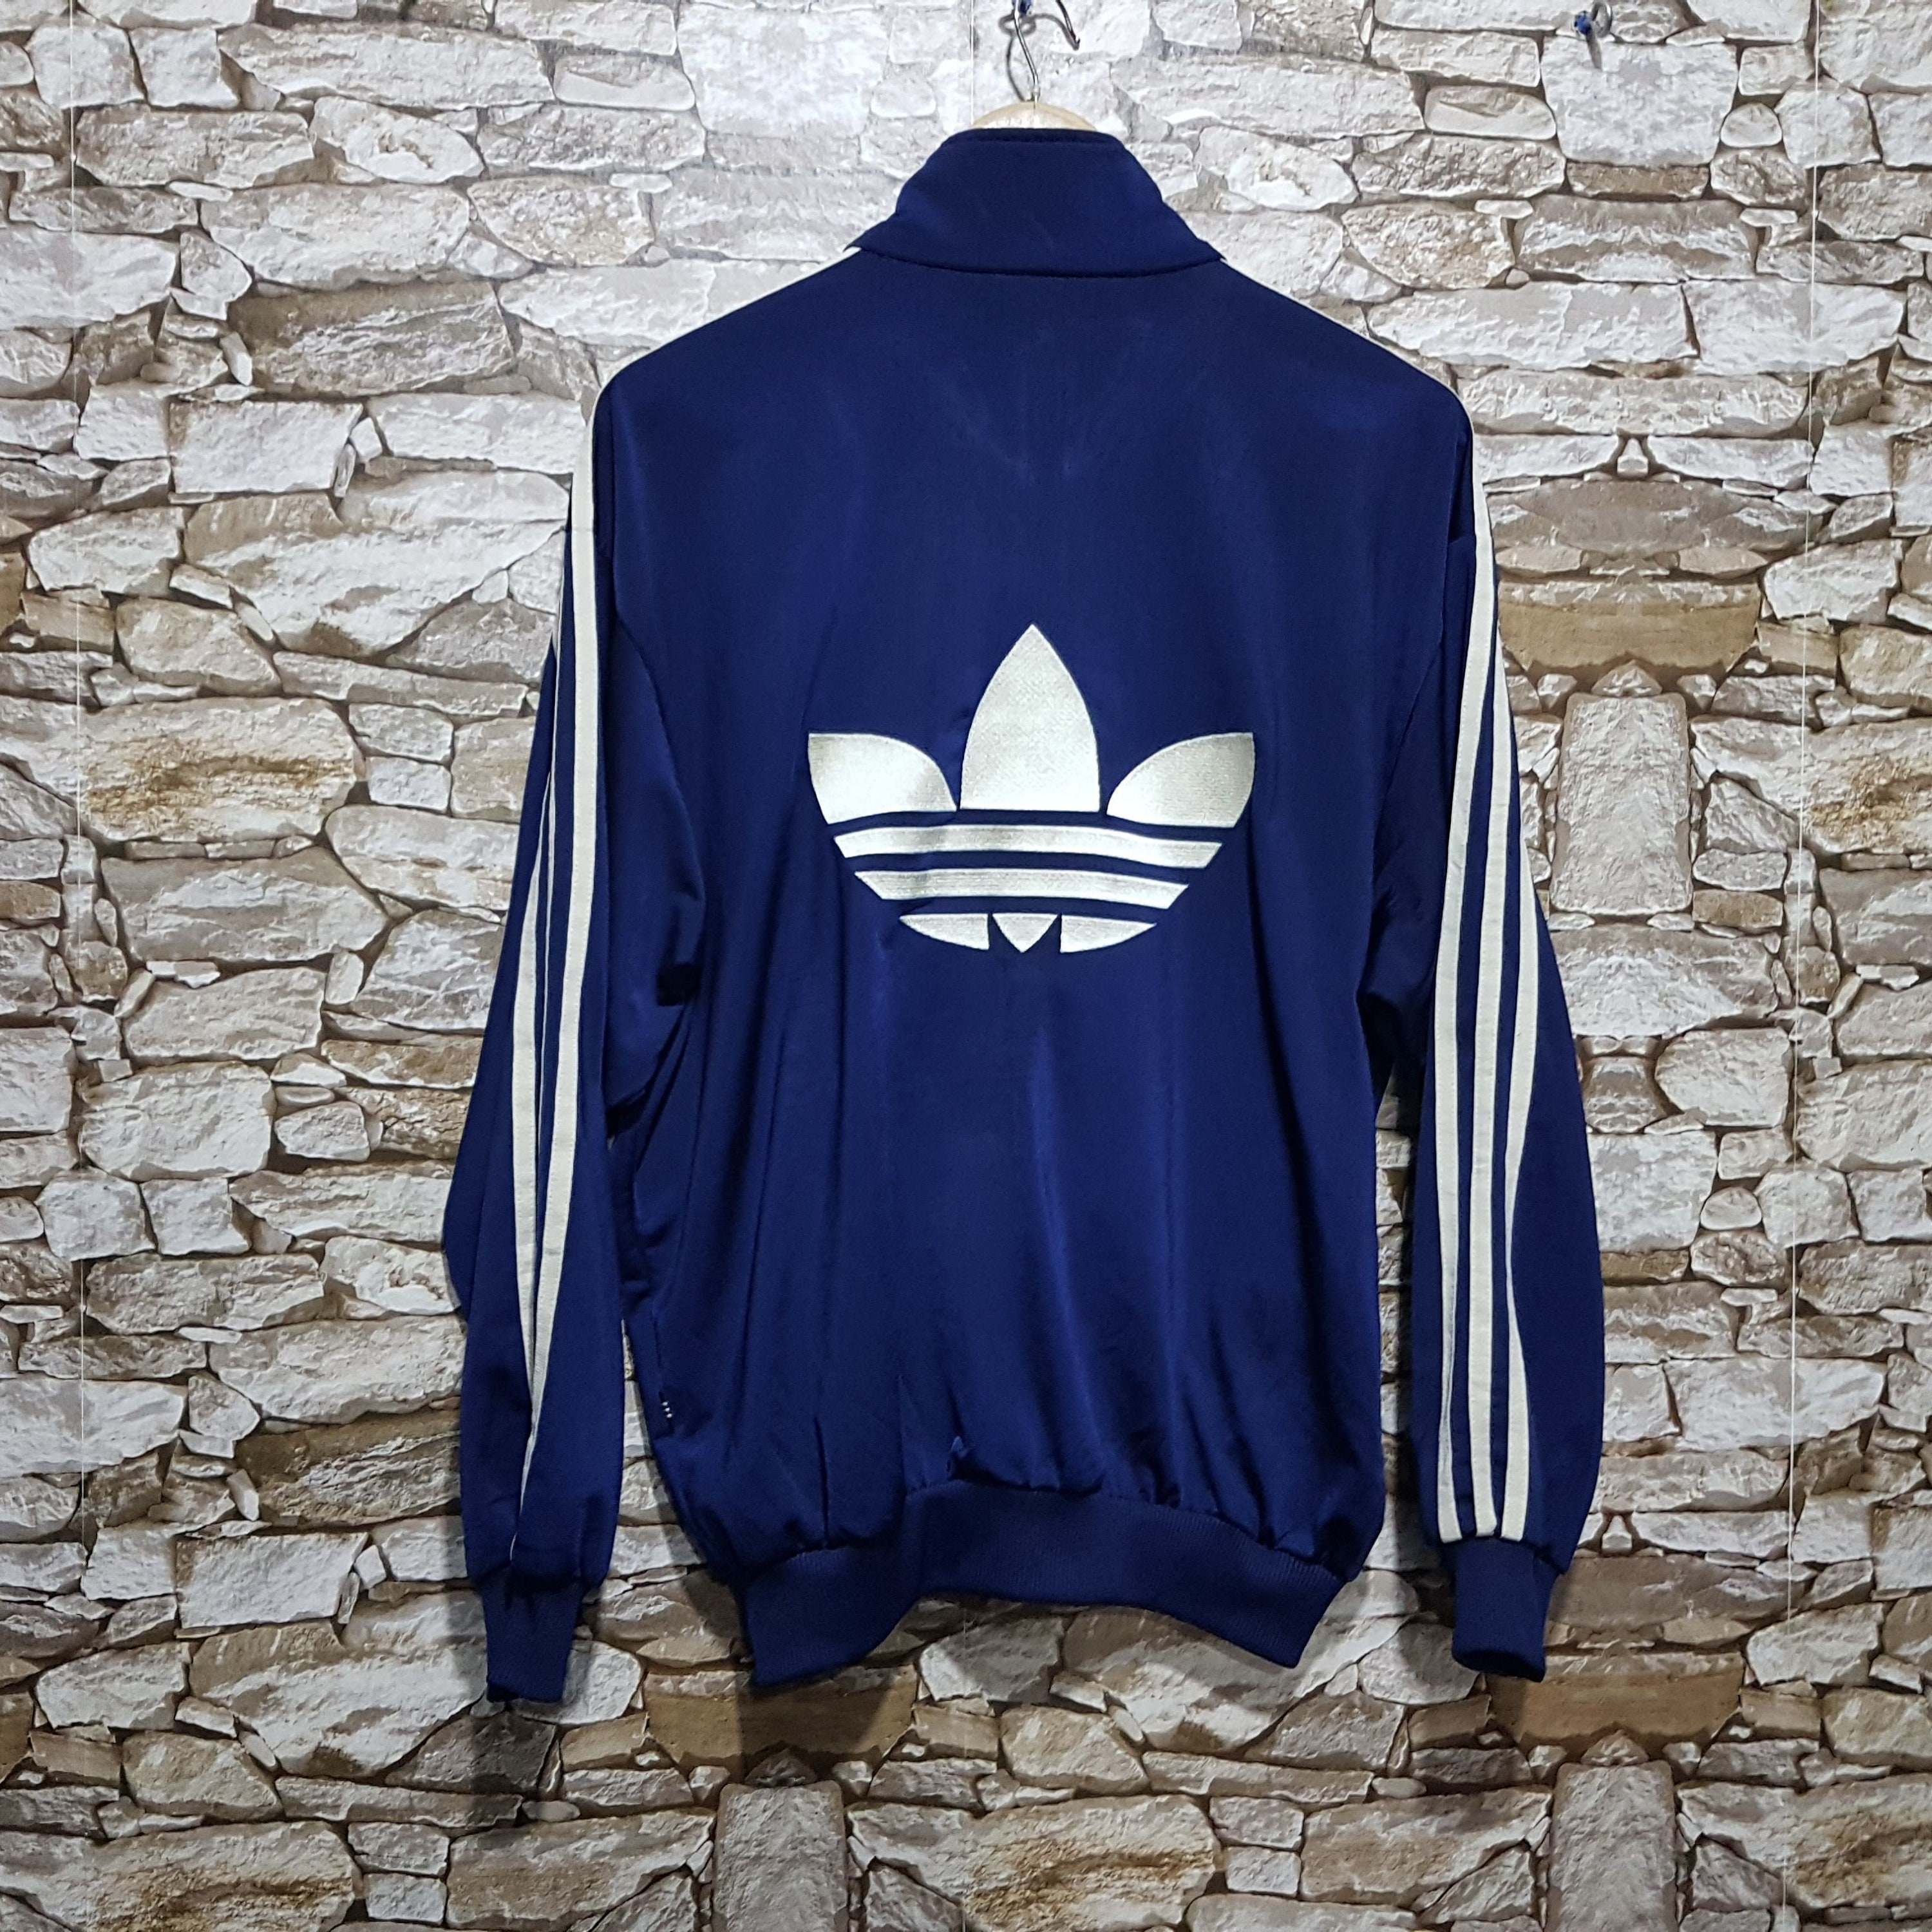 90s Adidas Track Top - Etsy